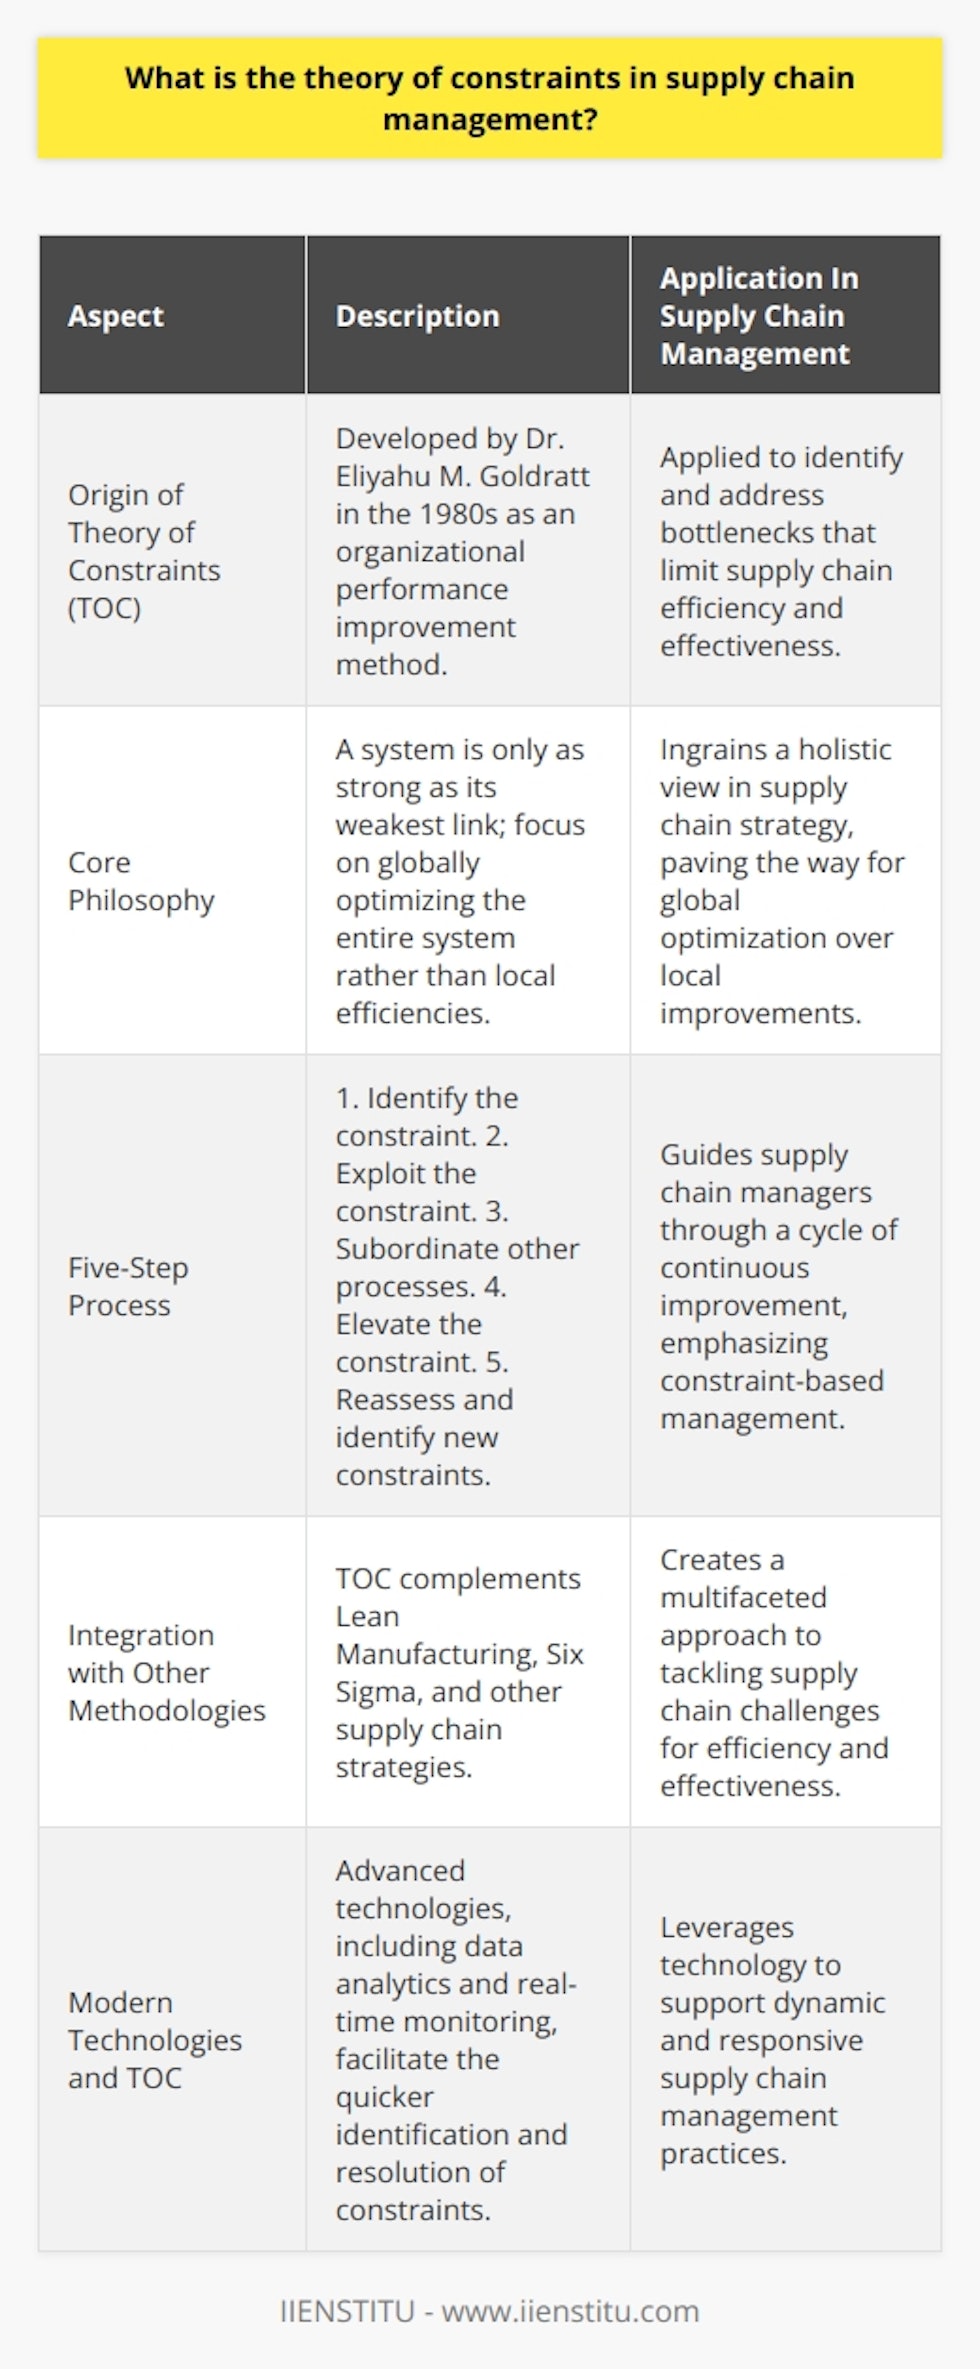 Theory of Constraints (TOC) is a pivotal concept in supply chain management that equips managers with a systematic method for identifying and overcoming the primary limitations, or bottlenecks, that impede the efficiency and effectiveness of a supply chain. It hinges on the understanding that the strength of a chain is determined by its weakest link, and similarly, the performance of a supply chain is restricted by its most critical constraint.Origins and Philosophy of TOCDeveloped by Dr. Eliyahu M. Goldratt in the 1980s, TOC emerged as a novel approach to improve organizational performance. It is rooted in the principle that every complex system, including supply chains, possesses at least one constraint that hampers its performance. TOC represents a shift from traditional management strategies that focus on local efficiencies and average performance measures, advocating instead for a holistic view centered on the global optimization of the system.Identifying and Exploiting ConstraintsIn the realm of supply chain management, TOC proposes a five-step process to achieve continuous improvement. These steps begin with identifying the system's constraint. This entails meticulous analysis of the supply chain to determine which resources or processes have the most significant effect on throughput, lead times, or operational costs.Once the constraint is pinpointed, the next step is to exploit it by optimizing the use of that constraint without incurring additional costs. For example, if a particular machine is a bottleneck, a business would ensure it operates with minimal downtime and maximum efficiency.Subordinating and Elevating the ConstraintThe further steps involve subordinating all other processes to the identified constraint, meaning that the entire supply chain is adjusted to support the pace set by the constraint. The fourth step is to elevate the constraint, which may involve investing in more resources, like adding capacity or developing alternate solutions to the bottleneck.Breaking Constraints and ReassessmentFollowing the alleviation of the identified constraint, the final step in the TOC process is to reassess the system to locate the next constraint, acknowledging that improving one aspect of the supply chain often leads to the emergence of a new bottleneck.The concept emphasizes a cycle of continuous assessment and improvement, which fosters agility and resilience in the supply chain. By focusing on constraints and approaching supply chain management from the TOC perspective, businesses enhance their responsiveness to market demands and customer needs while minimizing disruptions and maximizing overall supply chain throughput.Integration with Supply Chain StrategiesFor organizations seeking to leverage TOC, it is vital to integrate it with other supply chain methodologies such as Lean Manufacturing and Six Sigma. This integration provides a comprehensive and multifaceted strategy to manage supply chain challenges efficiently and effectively.The interplay between TOC and advanced technology solutions also plays a significant role in modern supply chains. For instance, data analytics and real-time monitoring can assist in quicker identification and resolution of constraints, offering a dynamic approach to supply chain management.Evidently, the Theory of Constraints provides supply chain managers with a robust framework to dissect complex systems and pinpoint leverage points that lead to substantial improvements. When implemented effectively, TOC fosters operational excellence, drives strategic thinking, and promotes a culture of continuous learning and improvement. As businesses strive to stay competitive in an ever-evolving global market, mastering the Theory of Constraints in supply chain management becomes an indispensable tool in achieving sustainability and success.